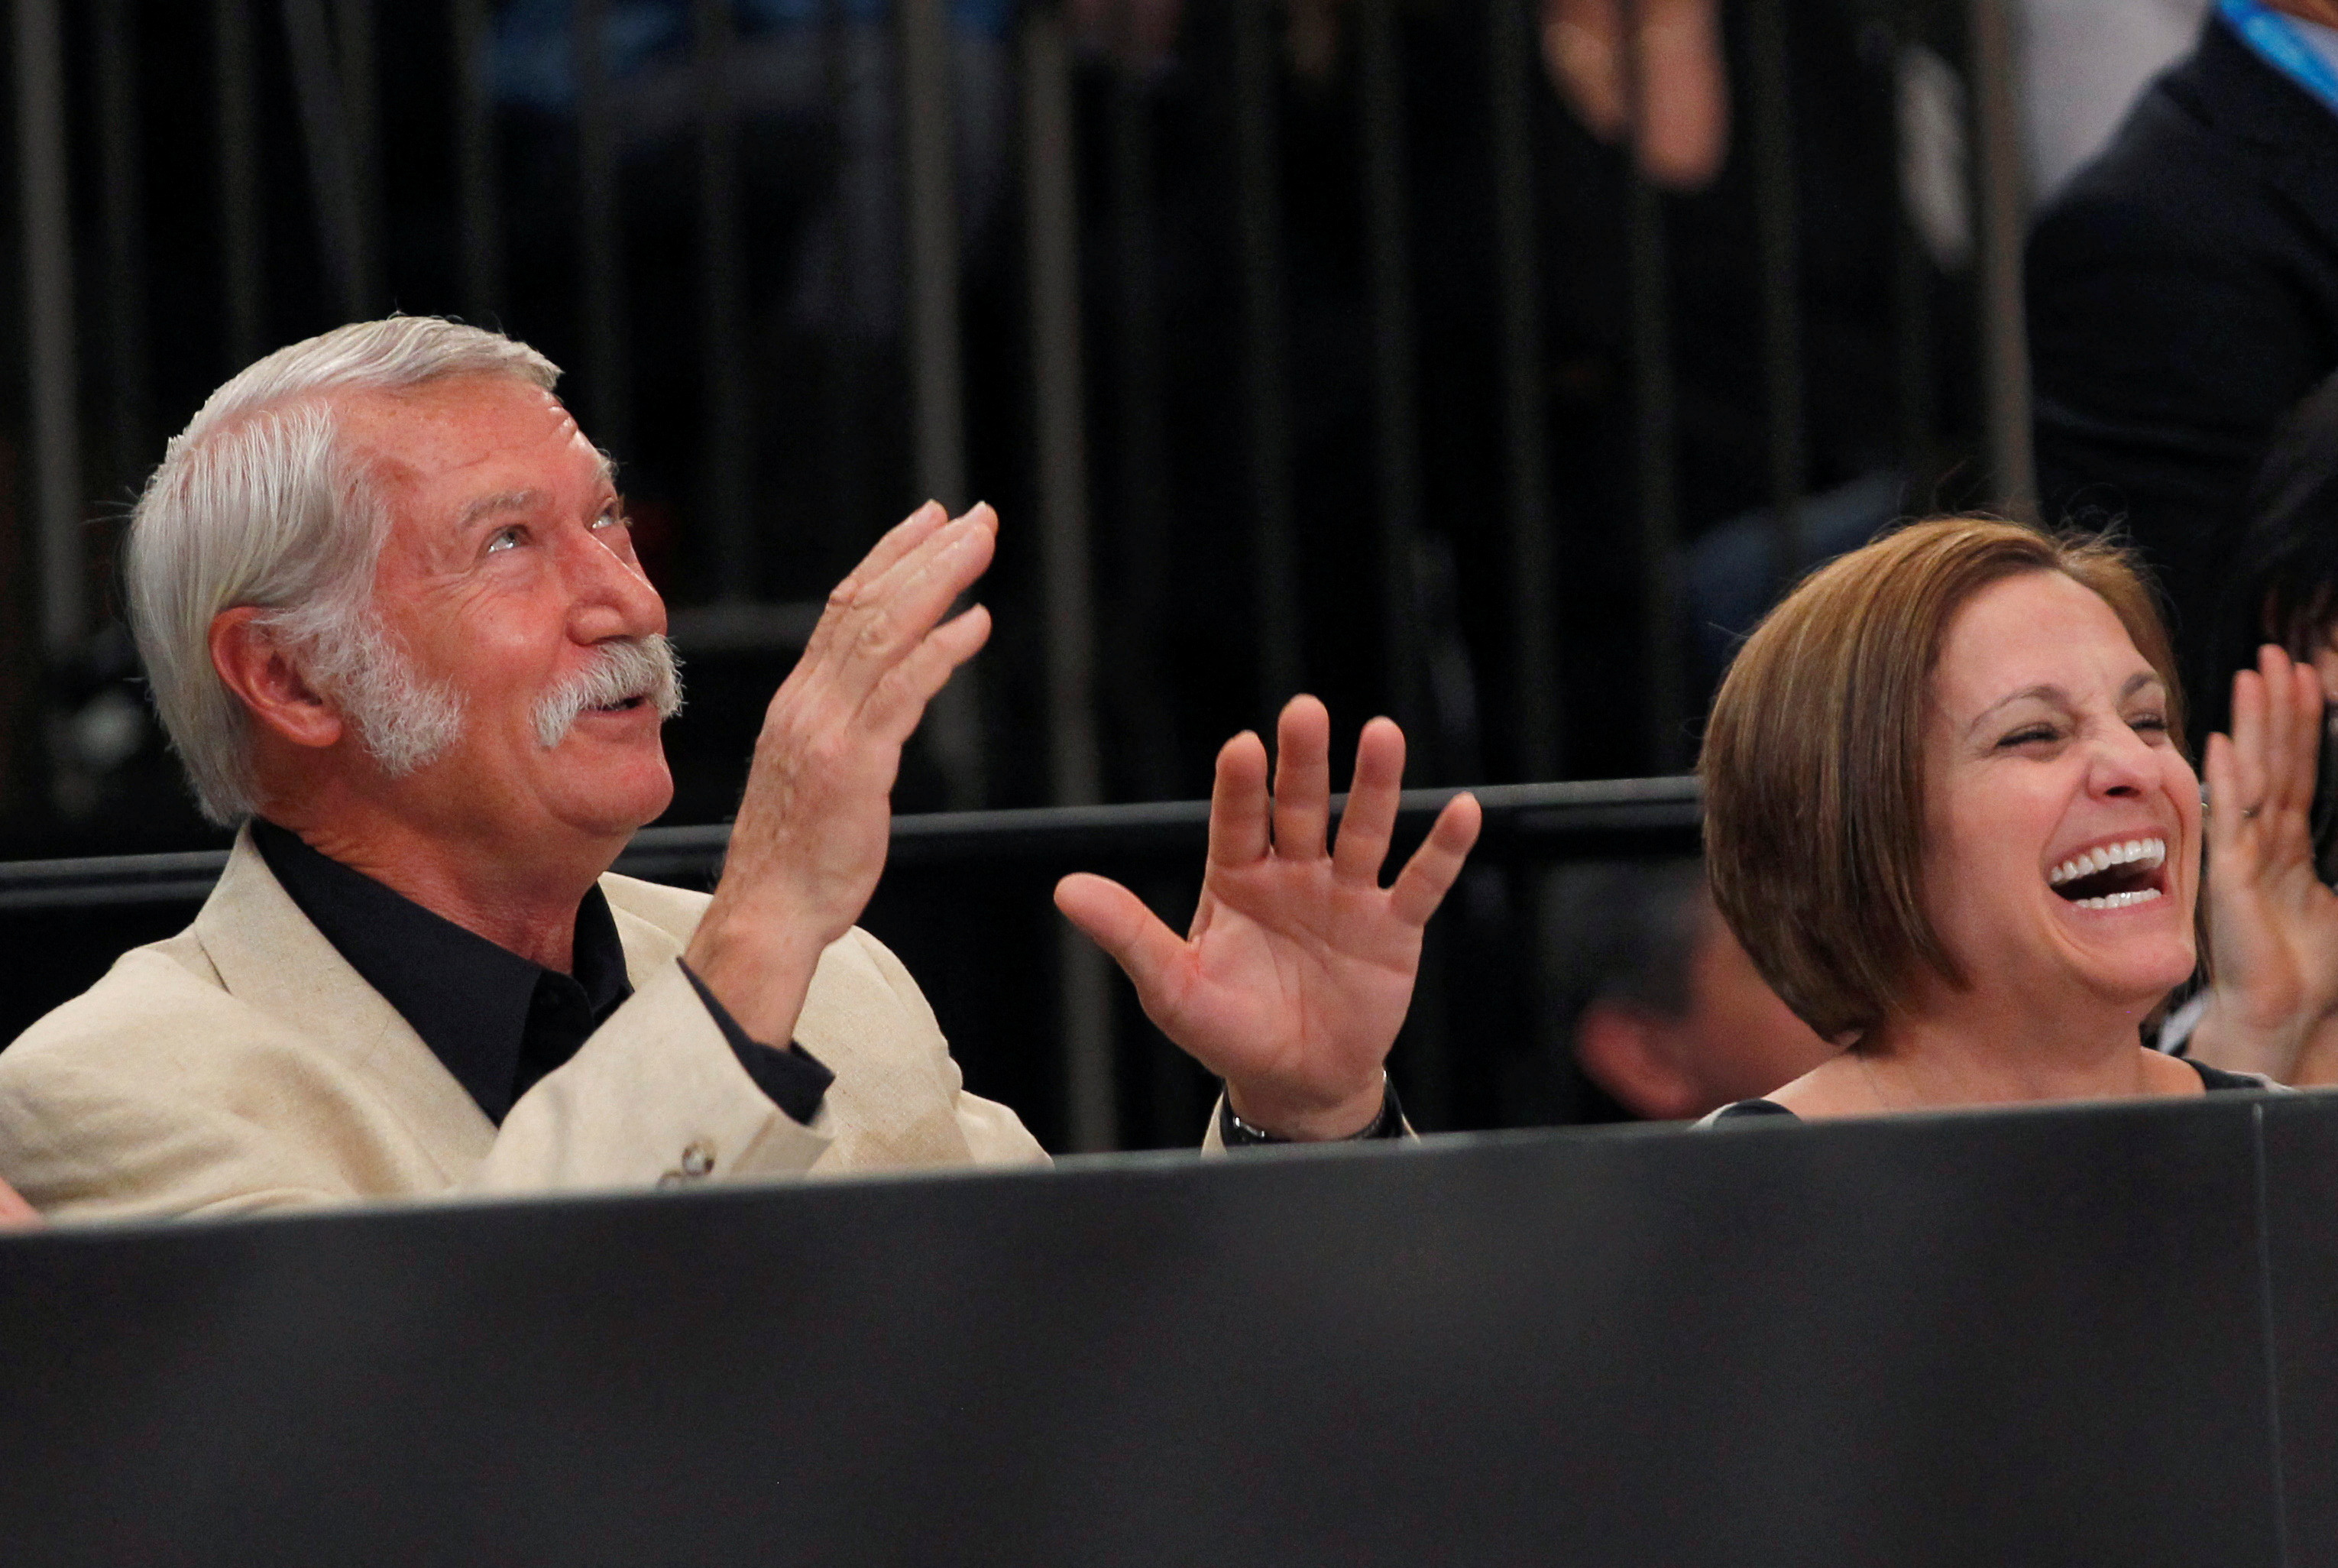 Former Olympic Gold medallist gymnast Retton of the U.S. and her former coach Karolyi laugh as they sit next to the floor during the AT&T American Cup gymnastics competition at New York's Madison Square